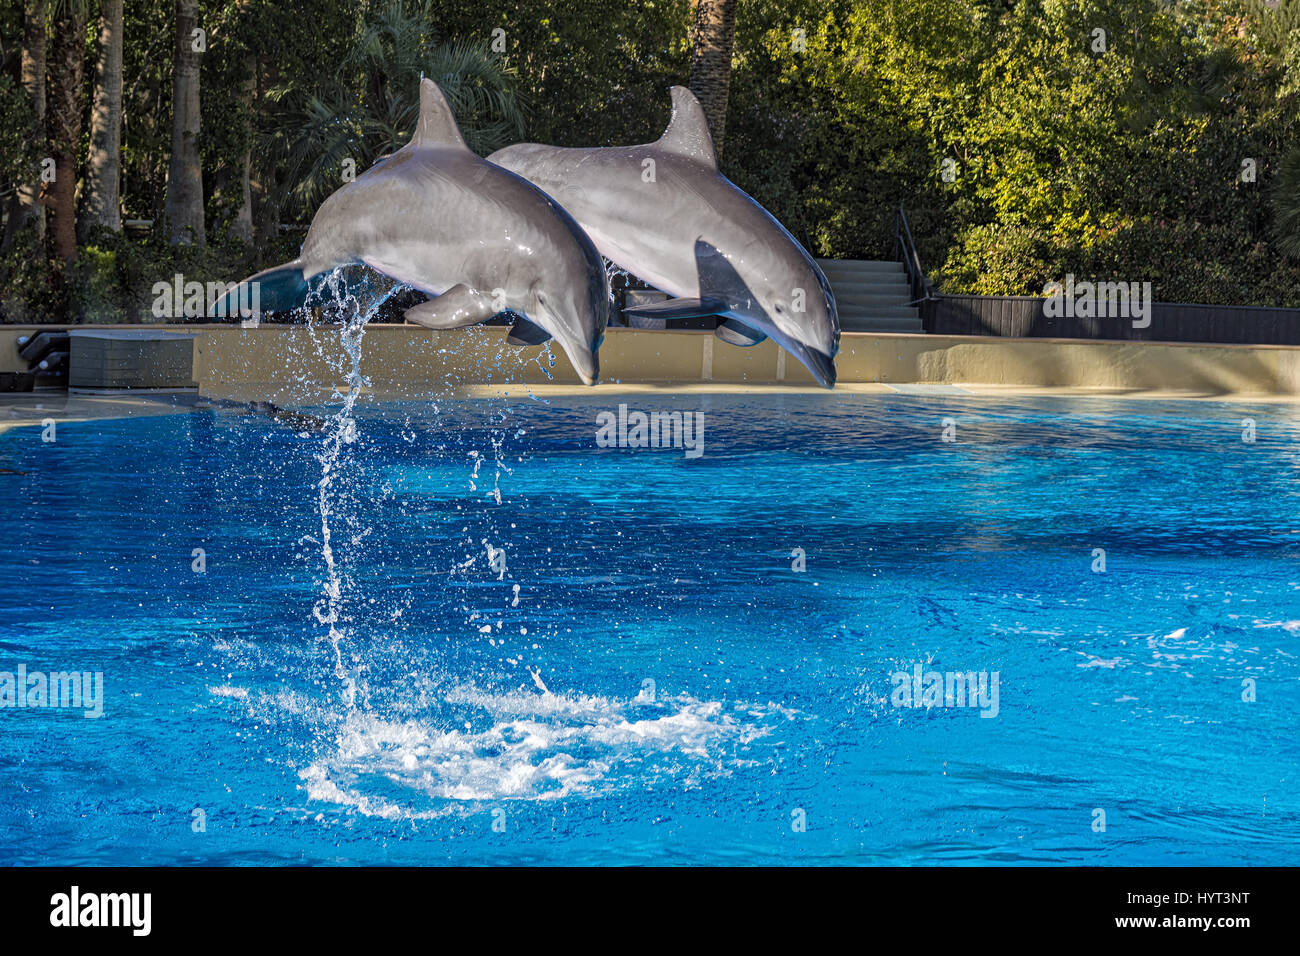 Two Dolphins jumping in formation out of an outdoor pool Stock Photo